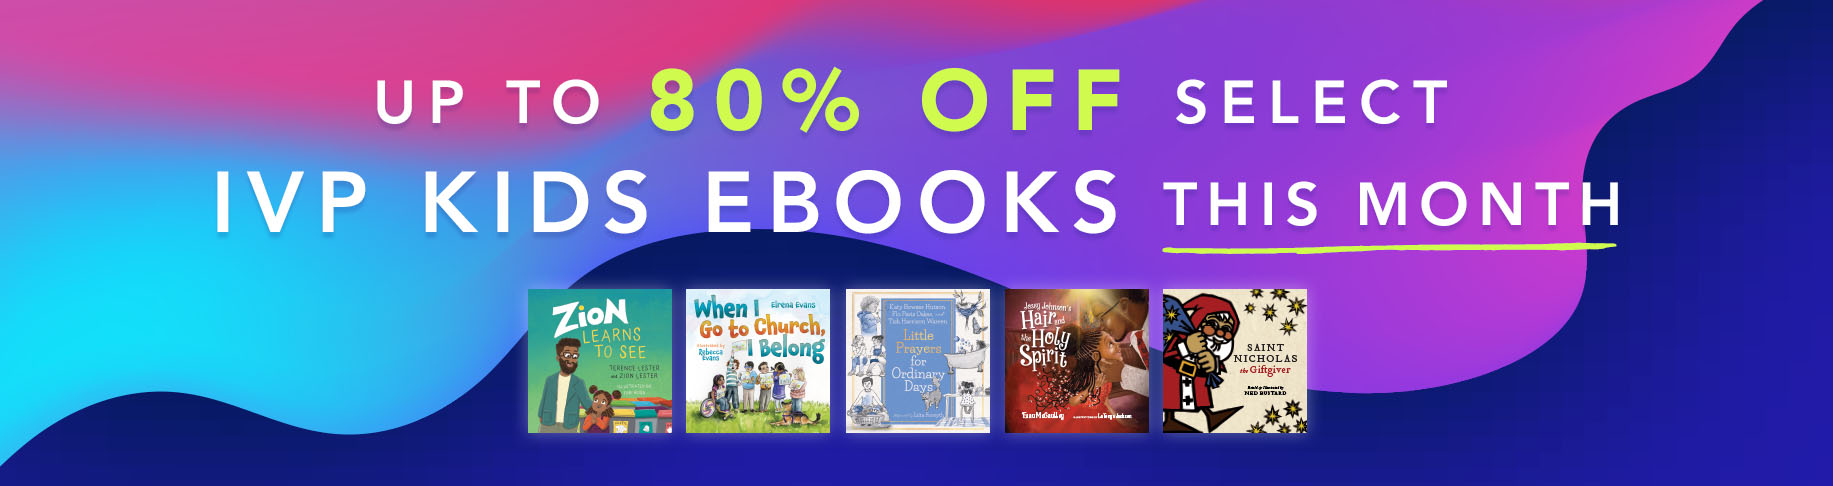 Up to 80% Off Select IVP Kids Ebooks the Month